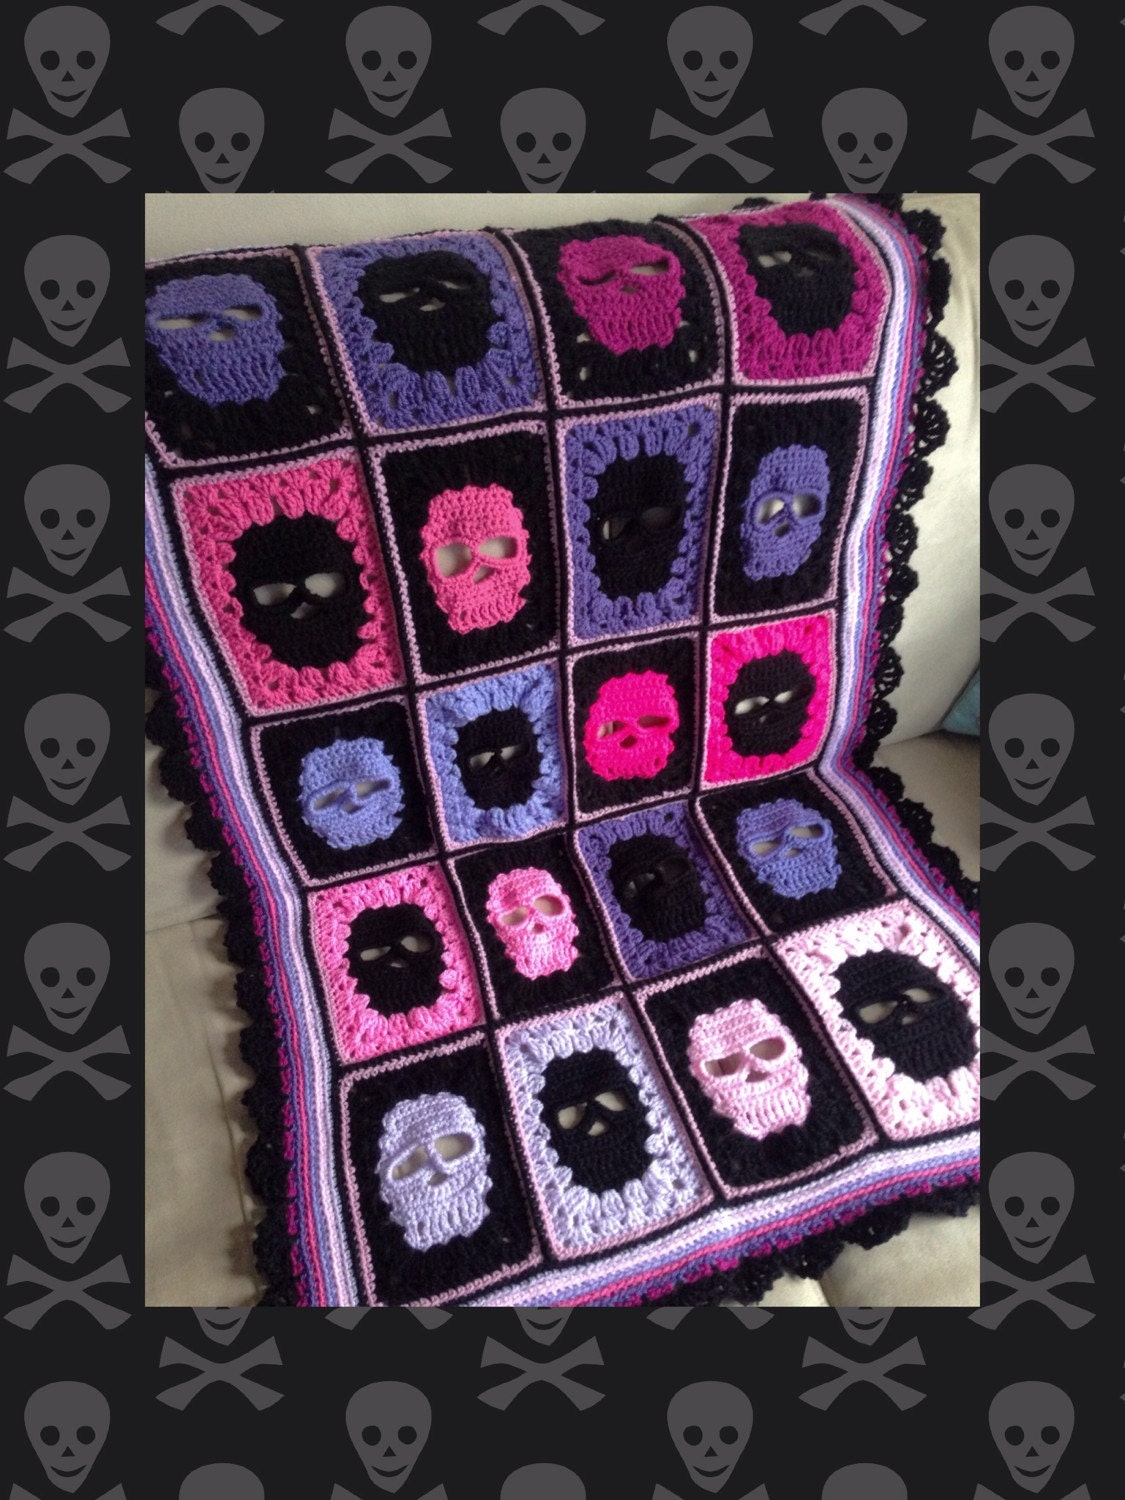 afghans on the double crochet pattern Blanket skull crochet afghan pattern patterns square blankets skulls afghans granny crafts visit projects